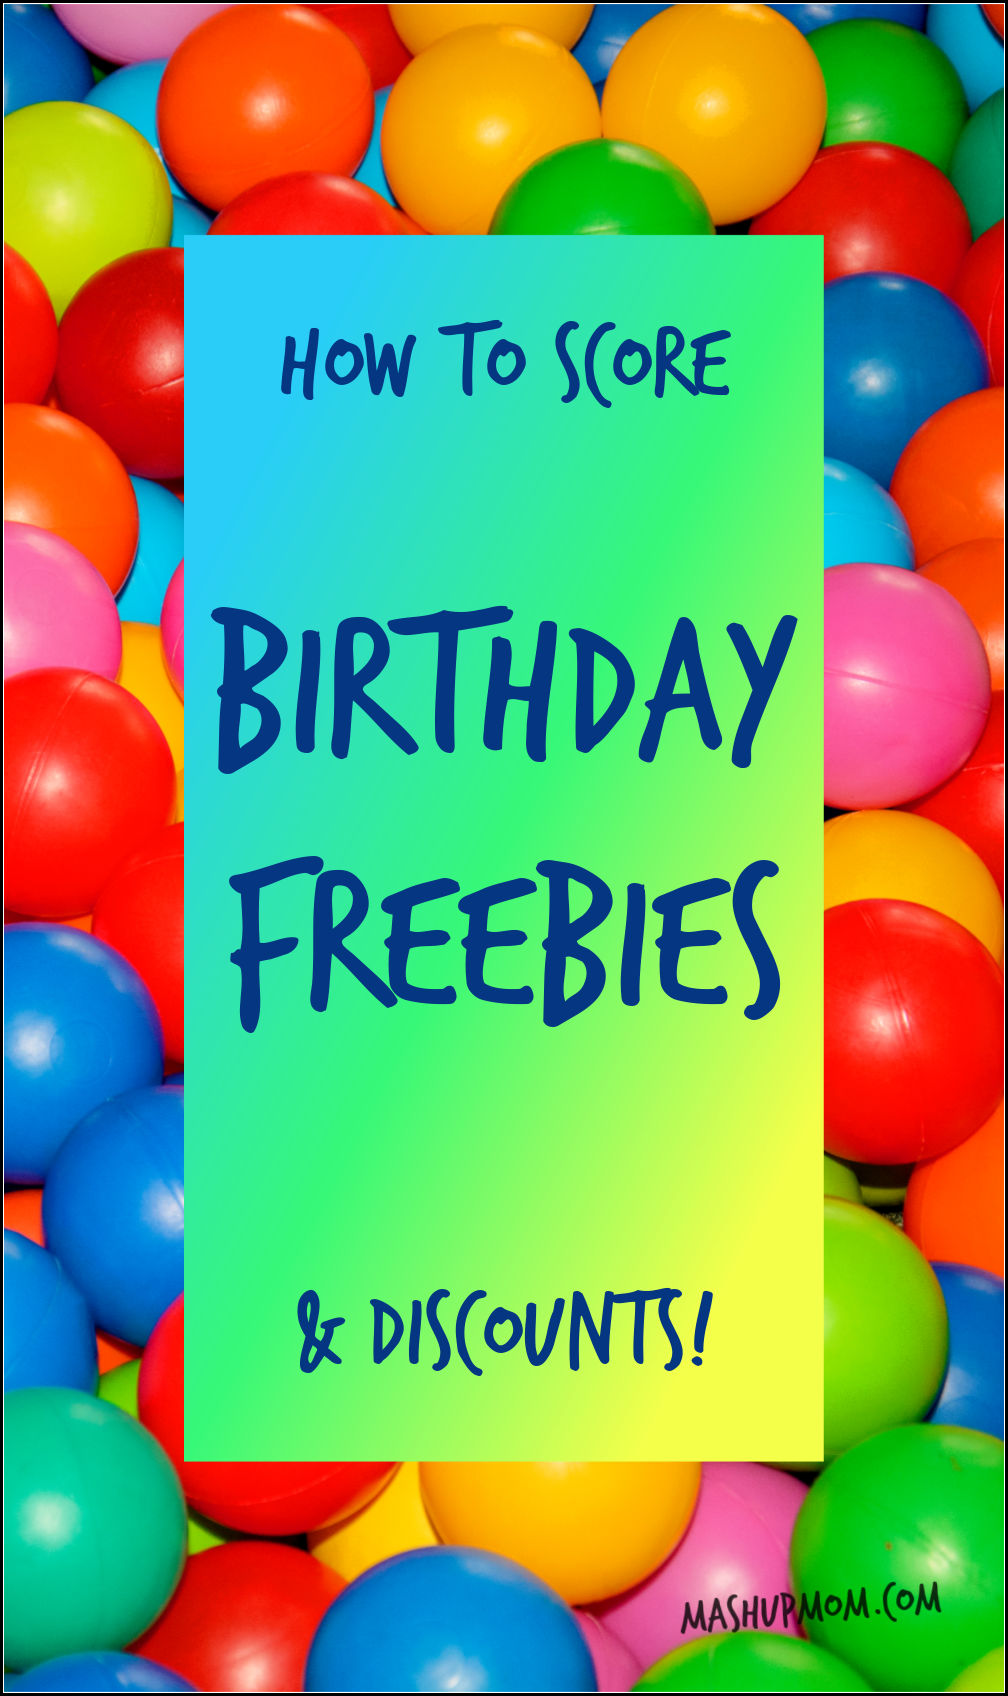 How to Score Birthday Freebies and Discounts